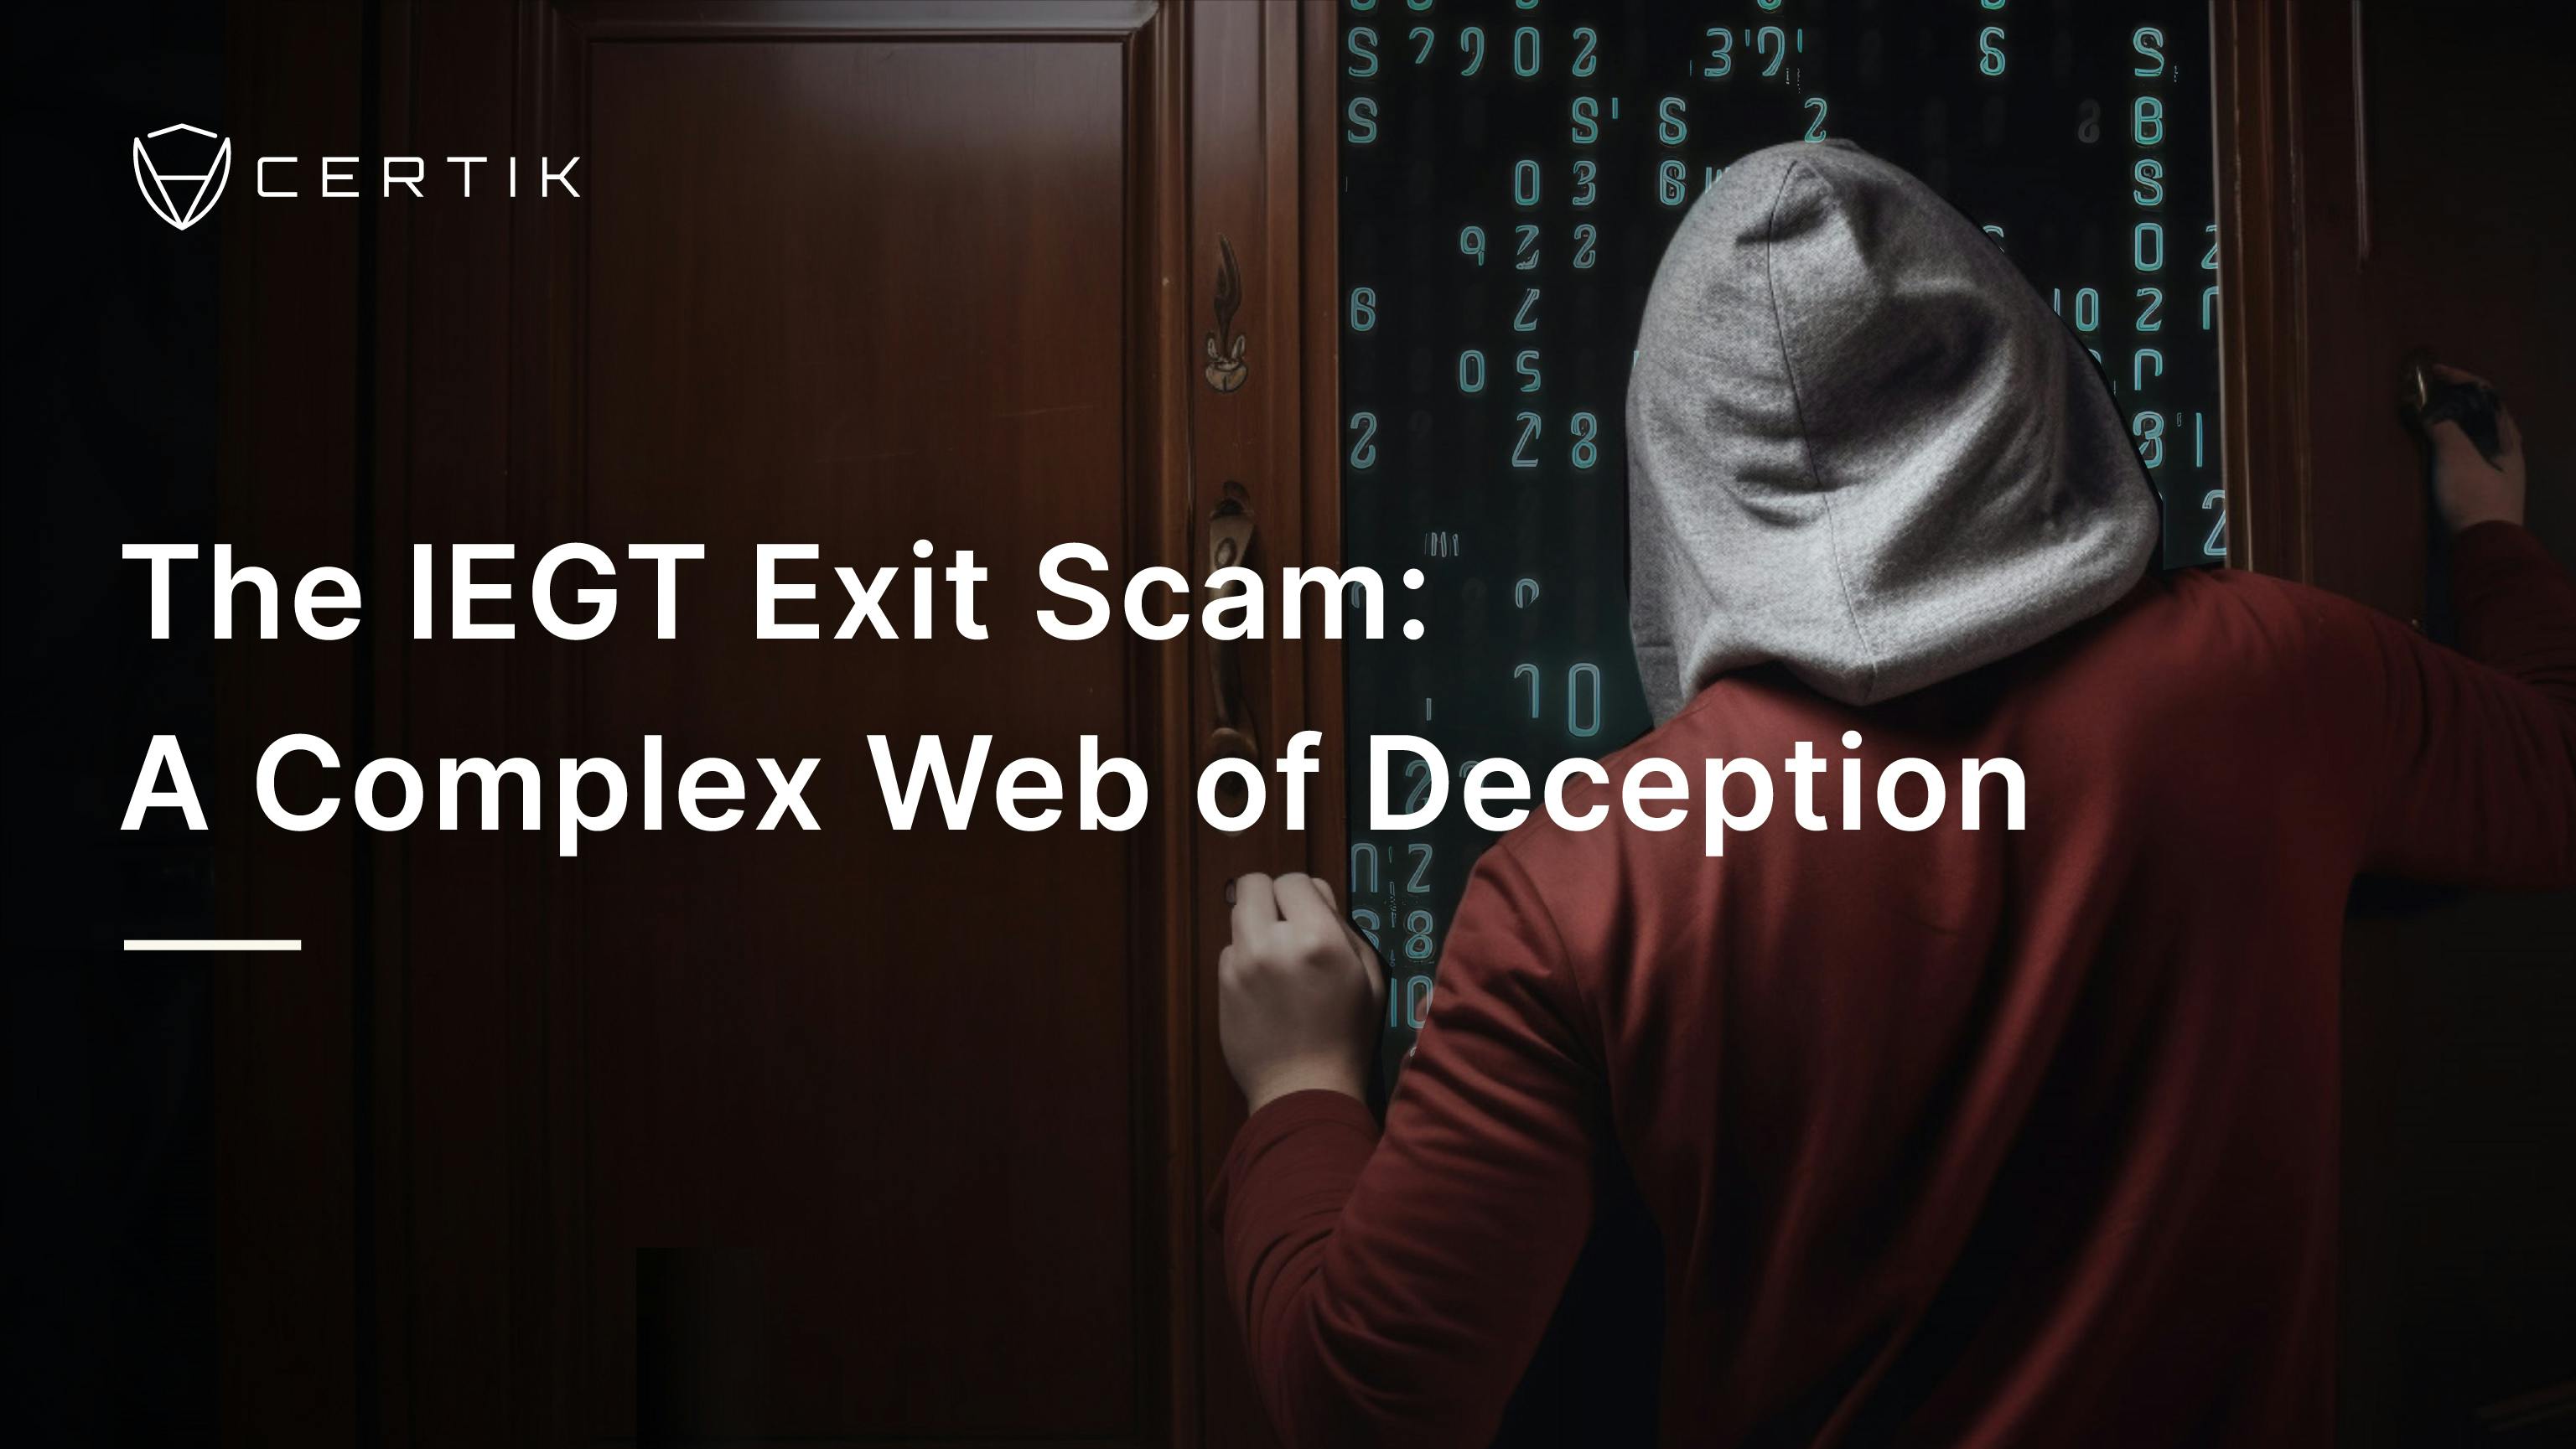 The IEGT Exit Scam: A Complex Web of Deception